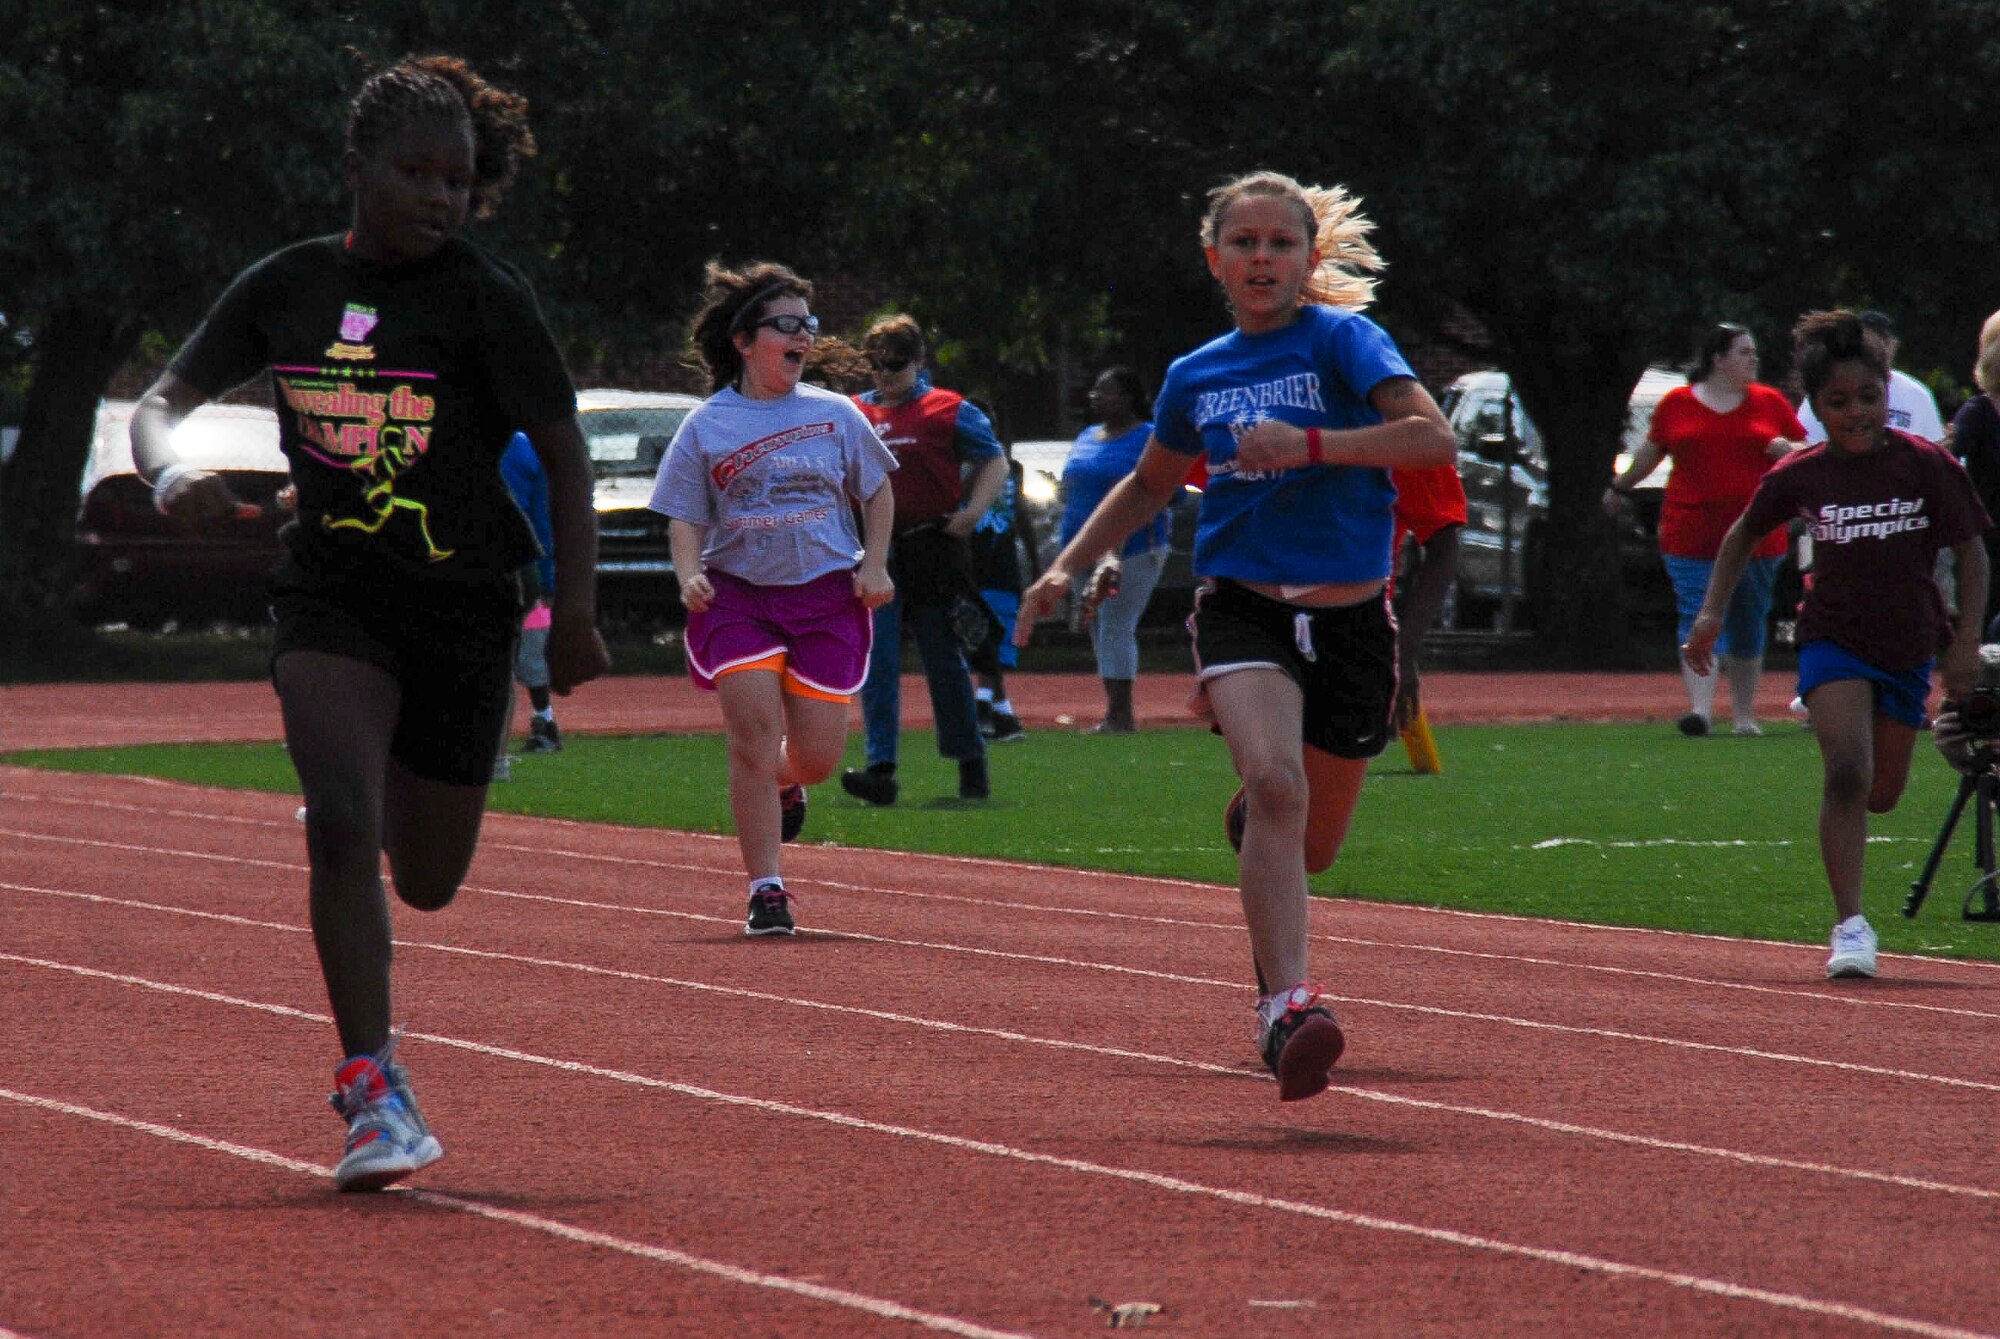 Catherine Hayes, daughter of Michael and Stephanie Hayes, runs in the 100 meter dash May 25, 2013, at the 2013 Arkansas Summer Special Olympics, at Harding University Football Stadium in Searcy, Ark. Catherine, diagnosed with autism, competed in two events at the Olympics. (U.S. Air Force photo by Staff Sgt. Jacob Barreiro)